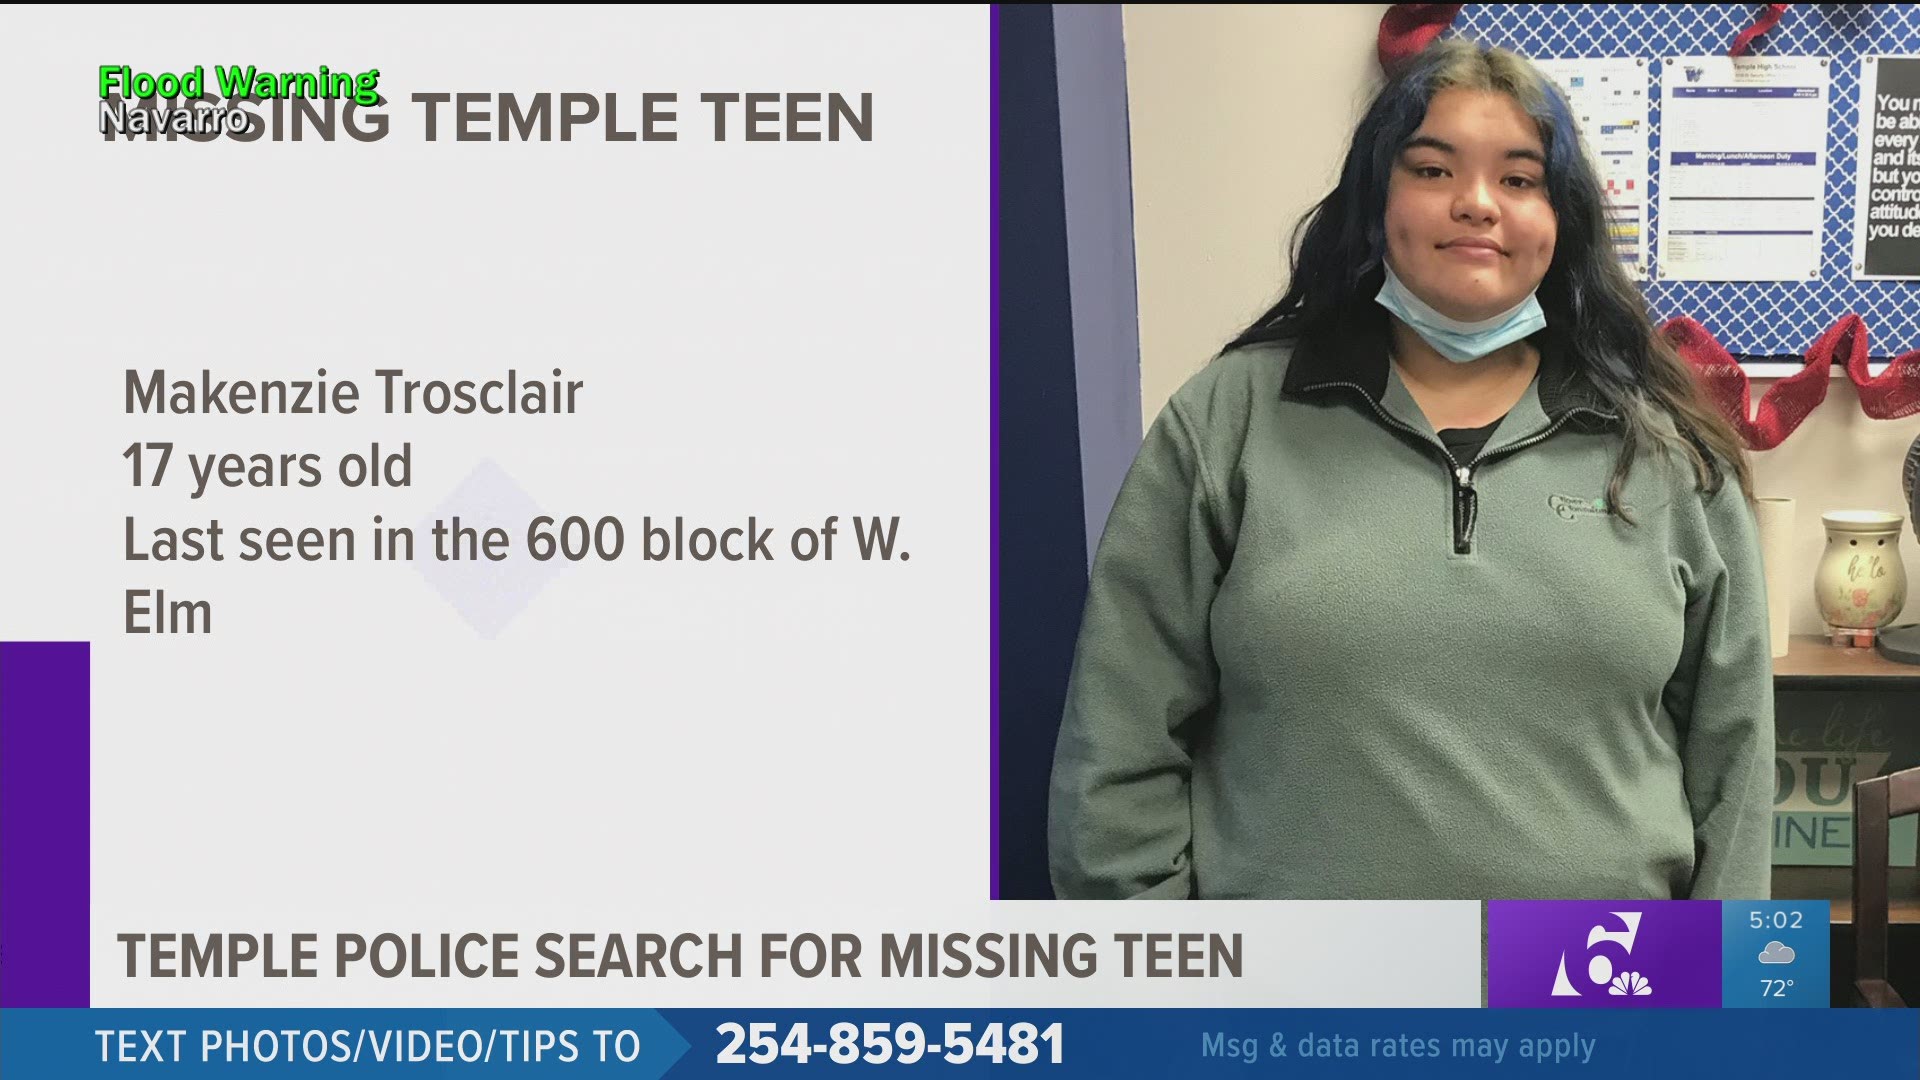 Temple police said Mackenzie Trosclair had not been seen since April 28.